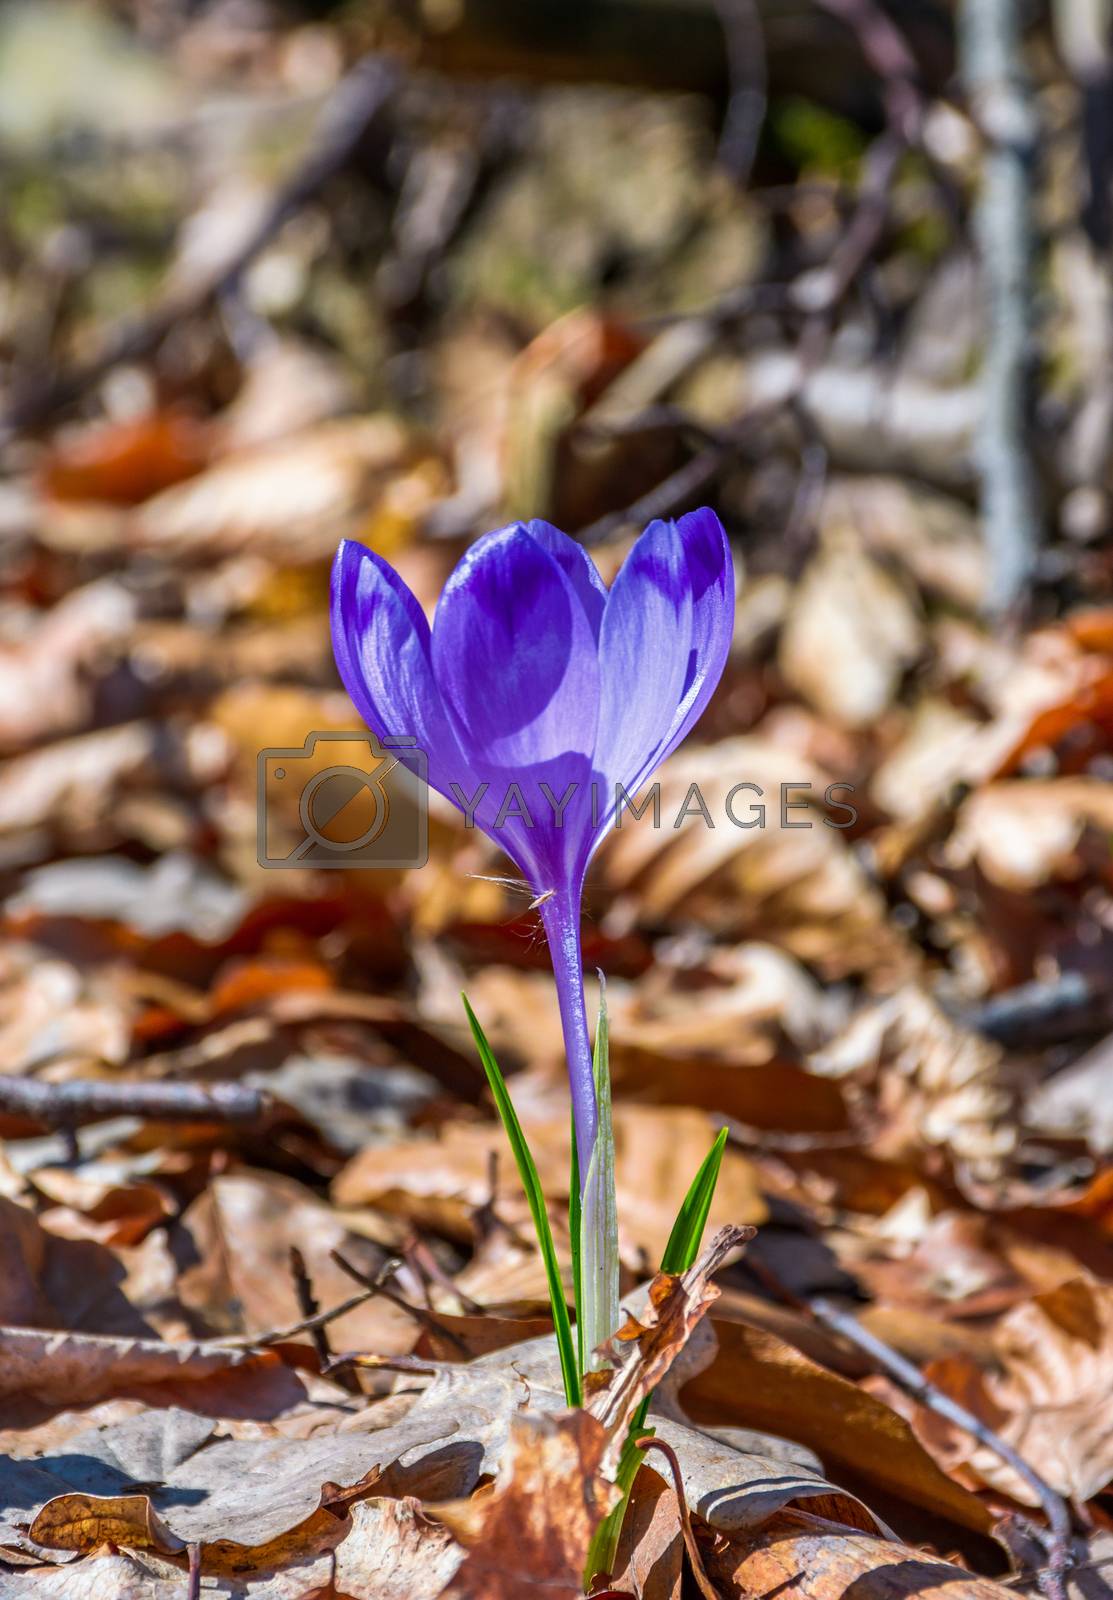 Royalty free image of purple crocus flowers in forest by Pellinni